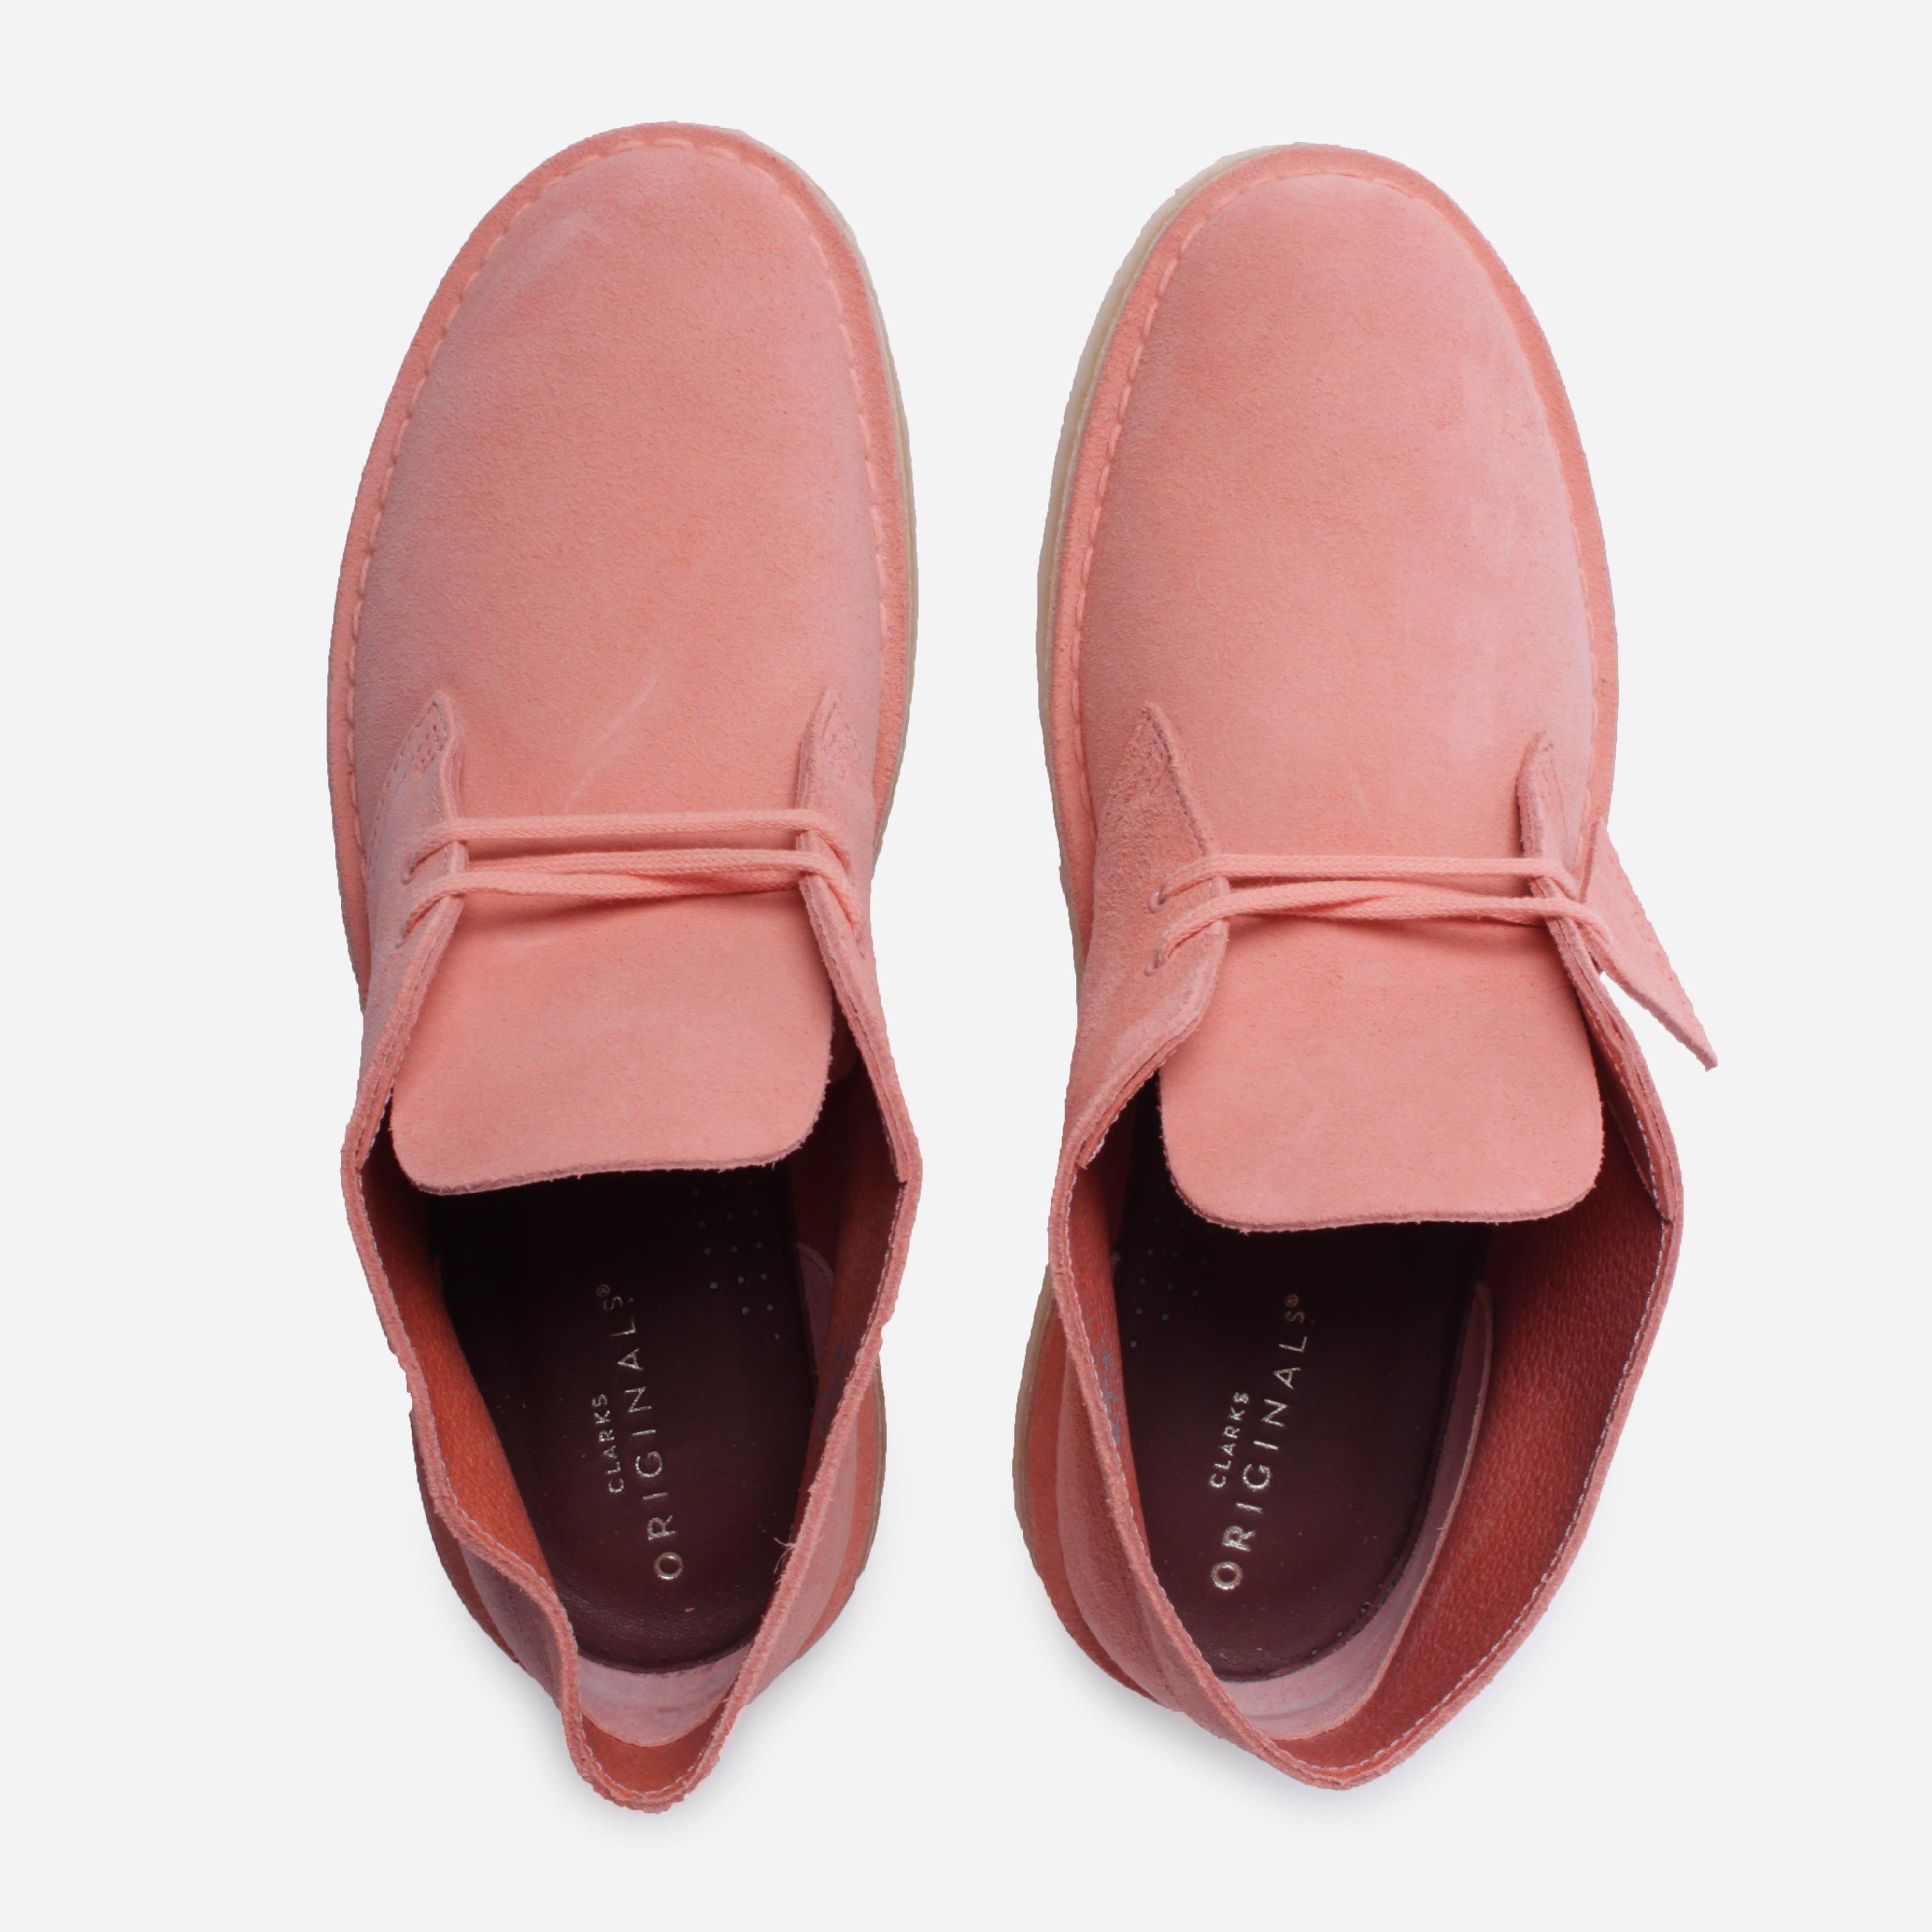 clarks pink shoes off 77% - online-sms.in